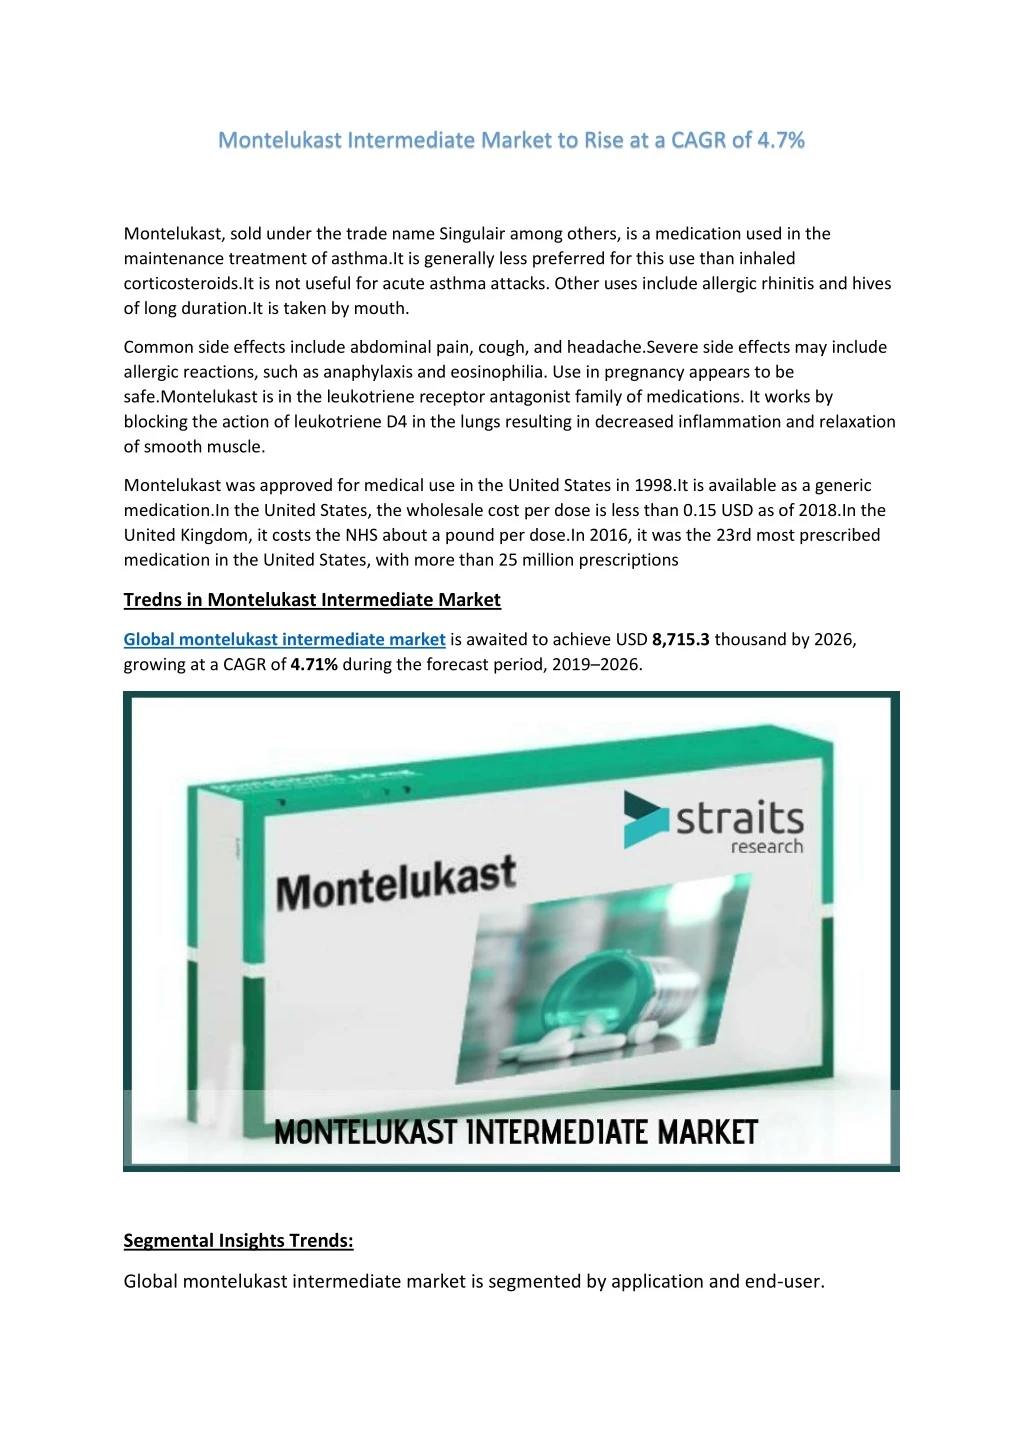 montelukast intermediate market to rise at a cagr